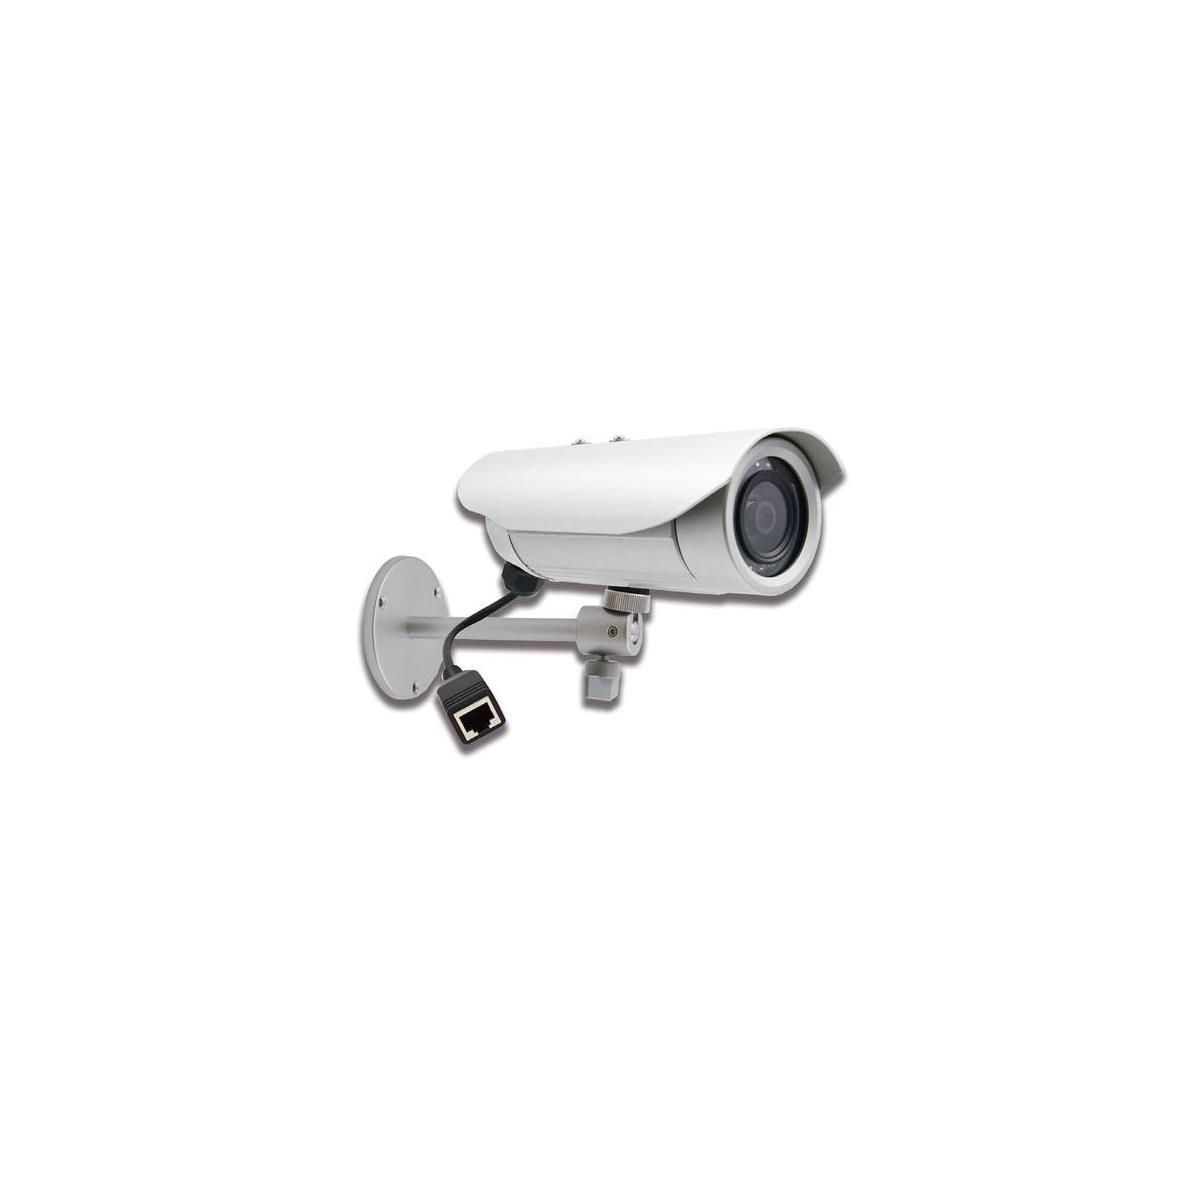 Image of ACTi E37 Day/Night Outdoor IP Bullet Camera